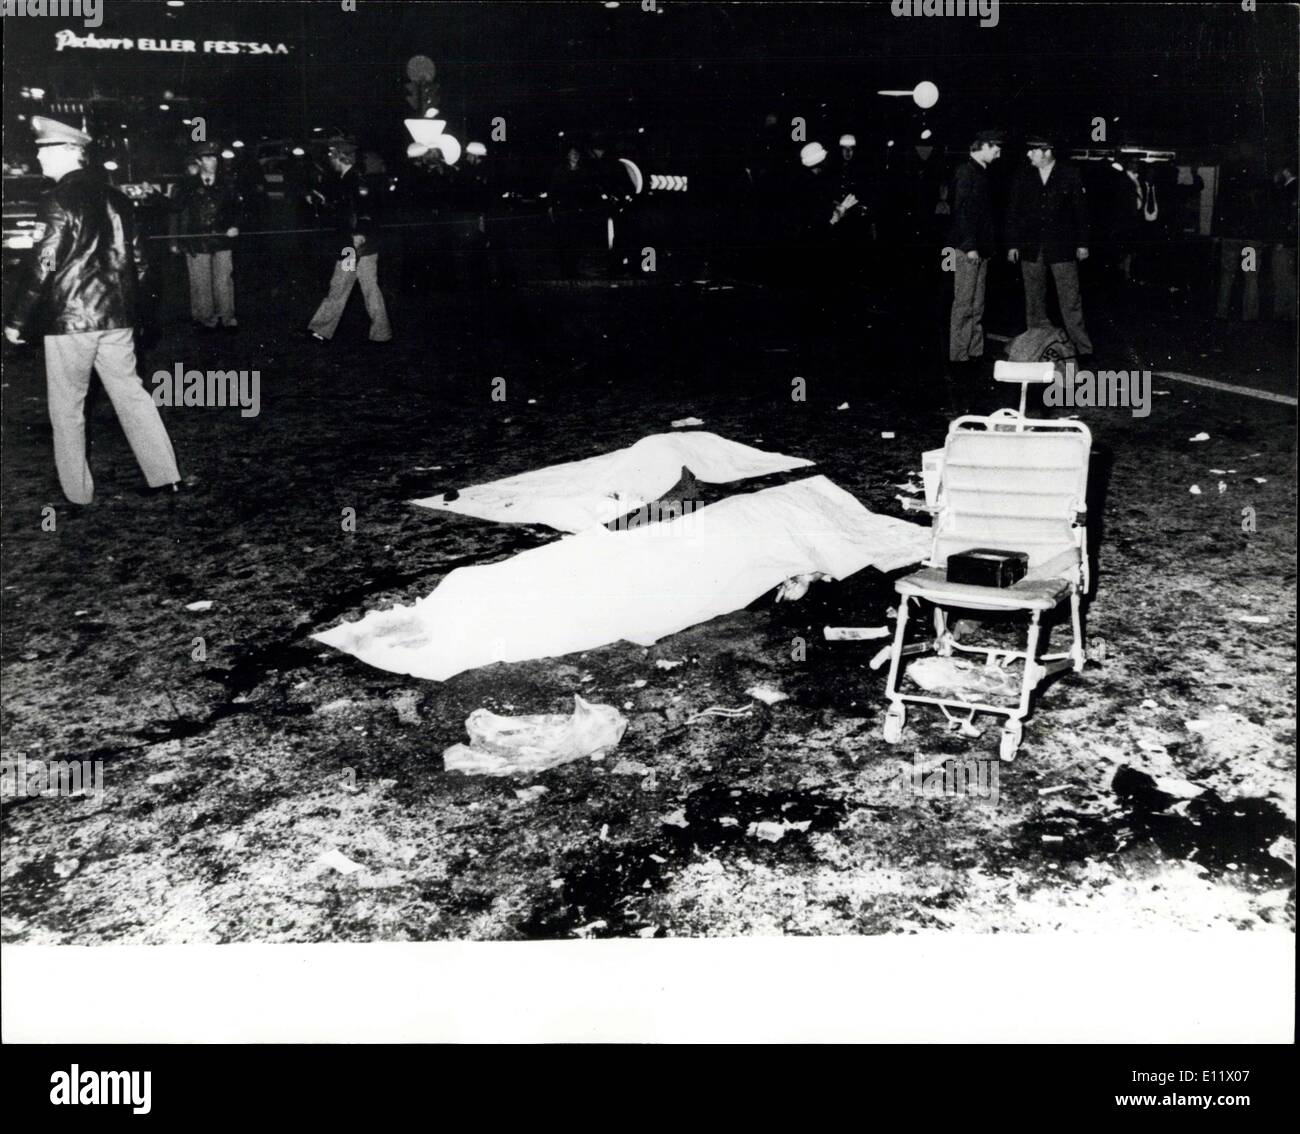 Sep. 29, 1980 - 14 Killed And Many Injured In The Munich Oktoberfest Bomb Blast: At least 14 people, which included three children were killed when a terrorist bomb exploded at the Oktoberfest beer festival on Friday night, and about 140 received injures. Photo shows Two of the dead lay under covers after the bomb explosion at the Oktoberfest bear festival in Munich. Stock Photo